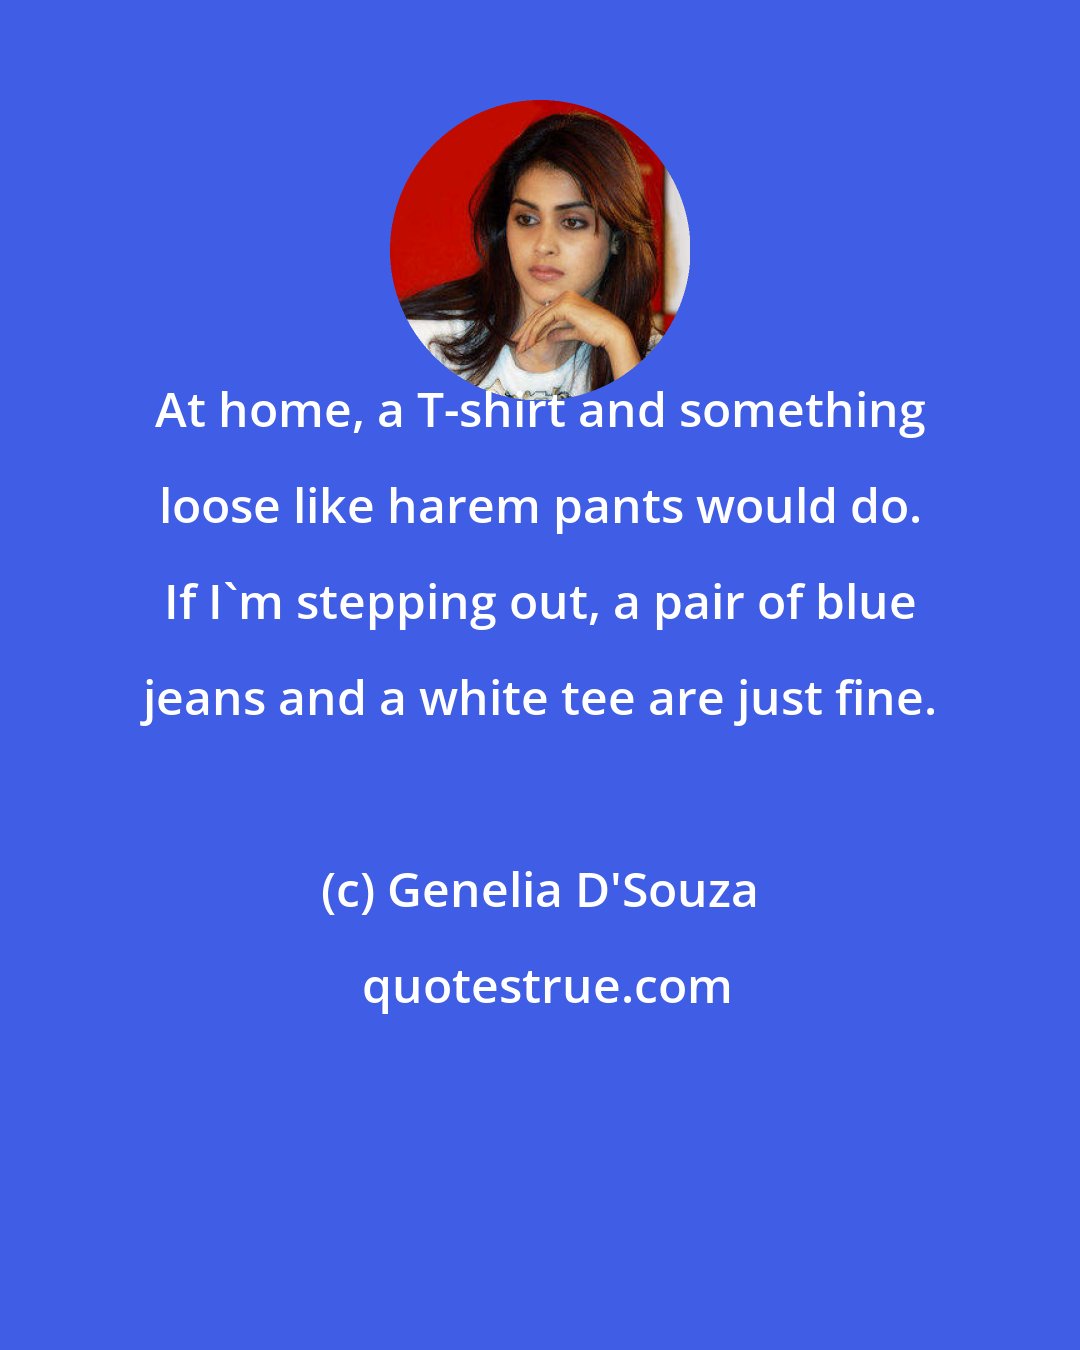 Genelia D'Souza: At home, a T-shirt and something loose like harem pants would do. If I'm stepping out, a pair of blue jeans and a white tee are just fine.